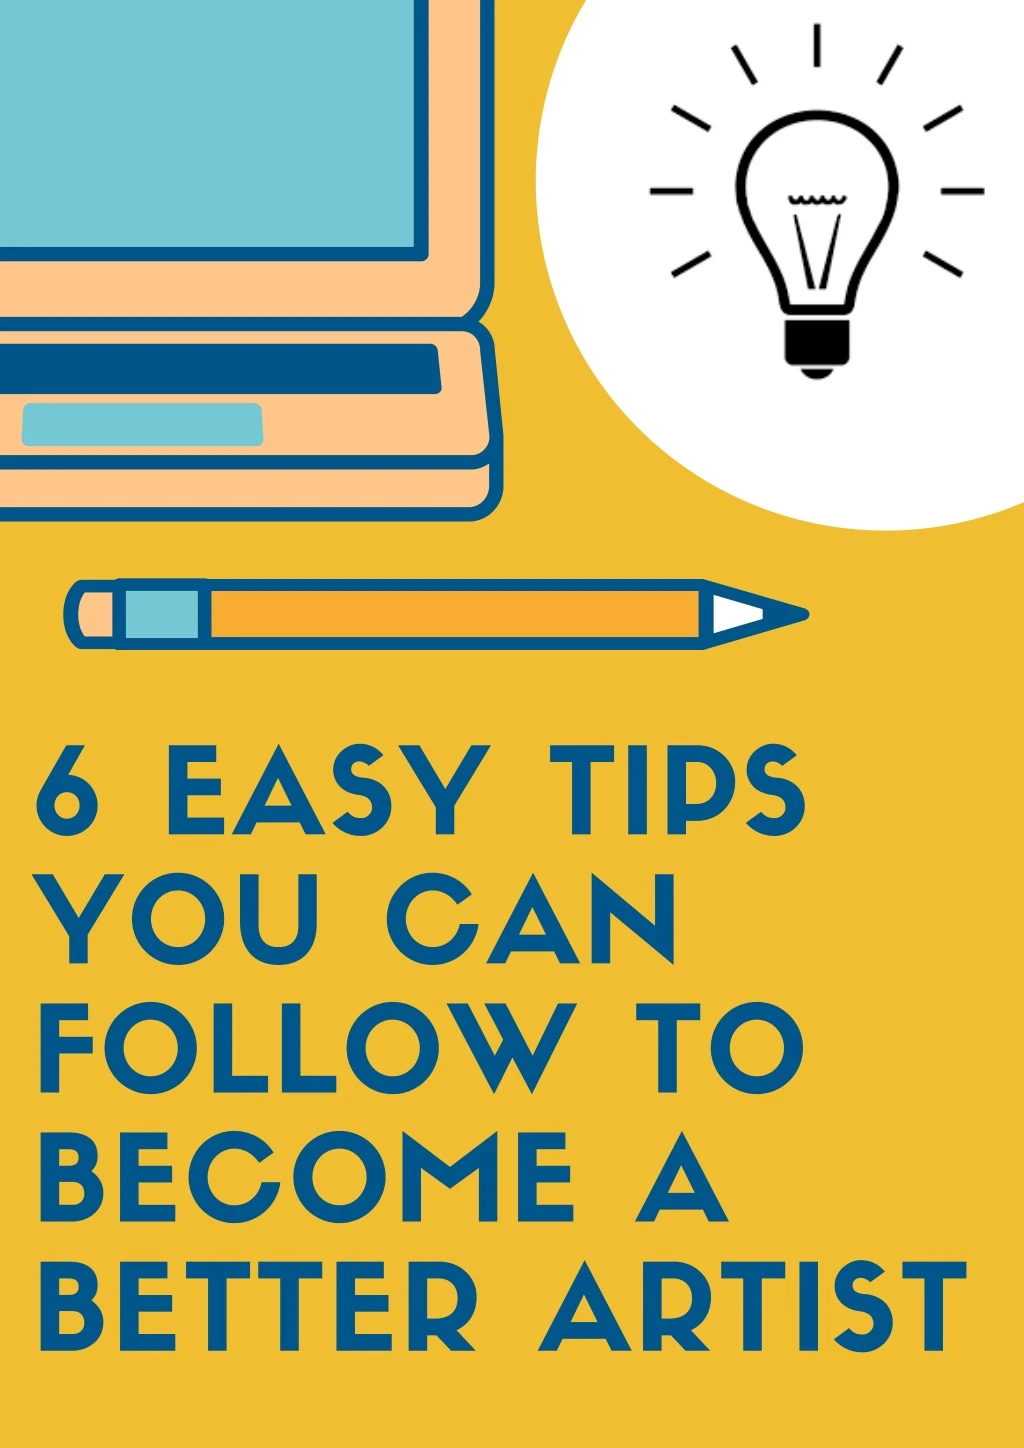 6 easy tips you can follow to become a better